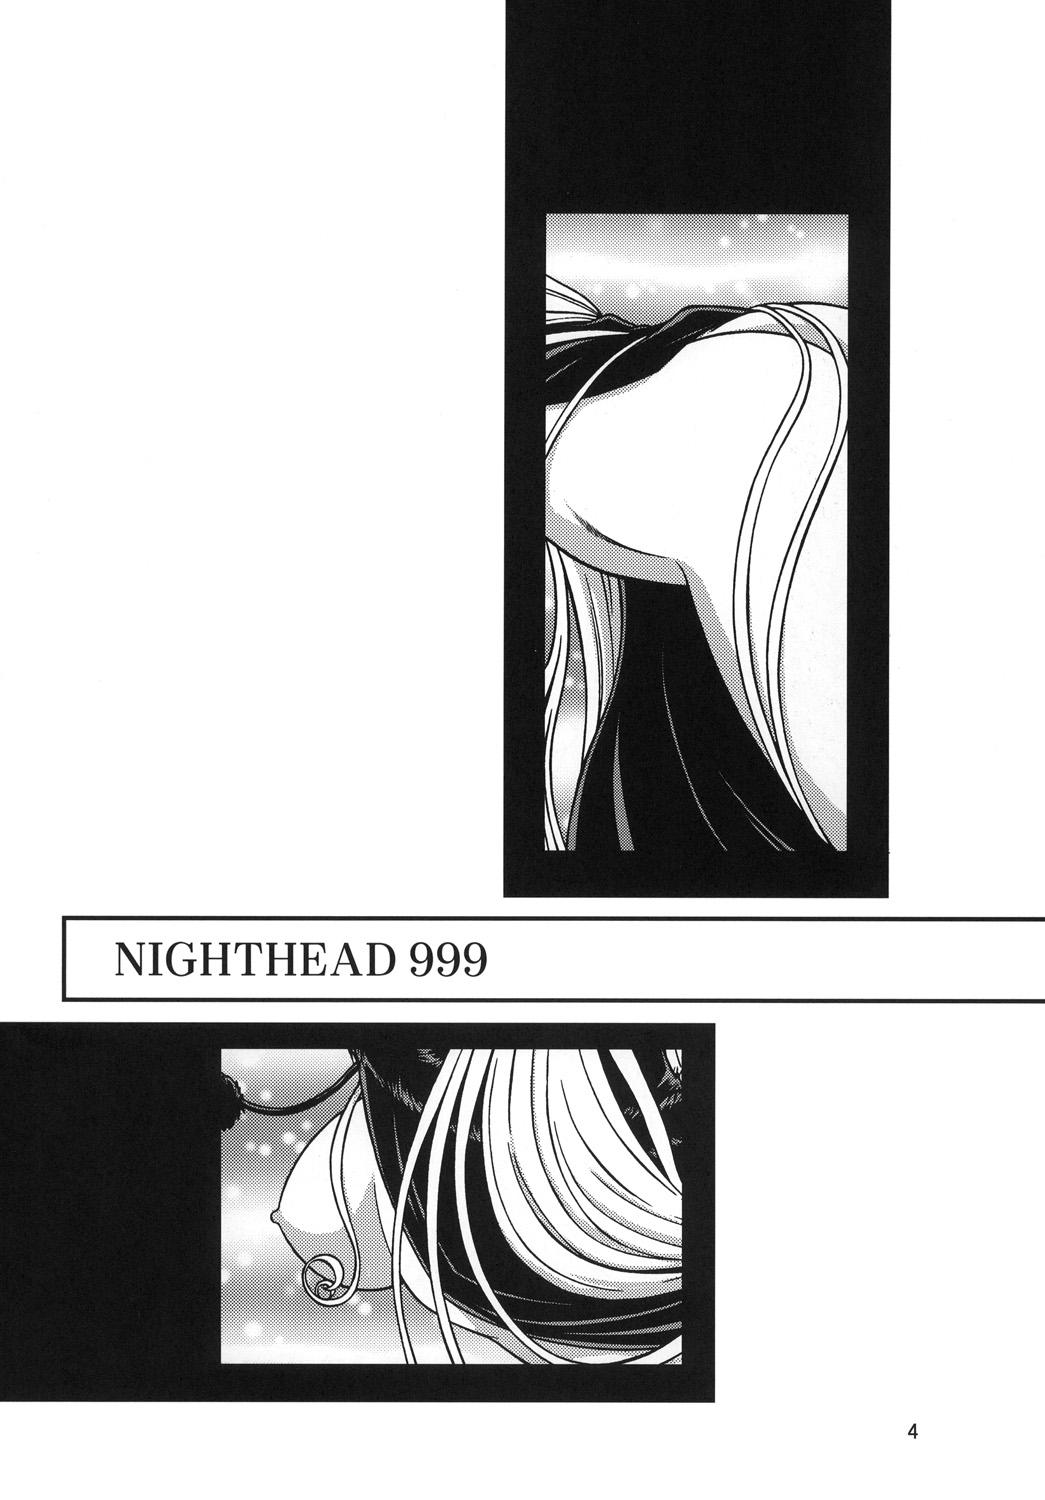 Fuck Porn NIGHTHEAD＋ - Galaxy express 999 Space pirate captain harlock Story - Page 3